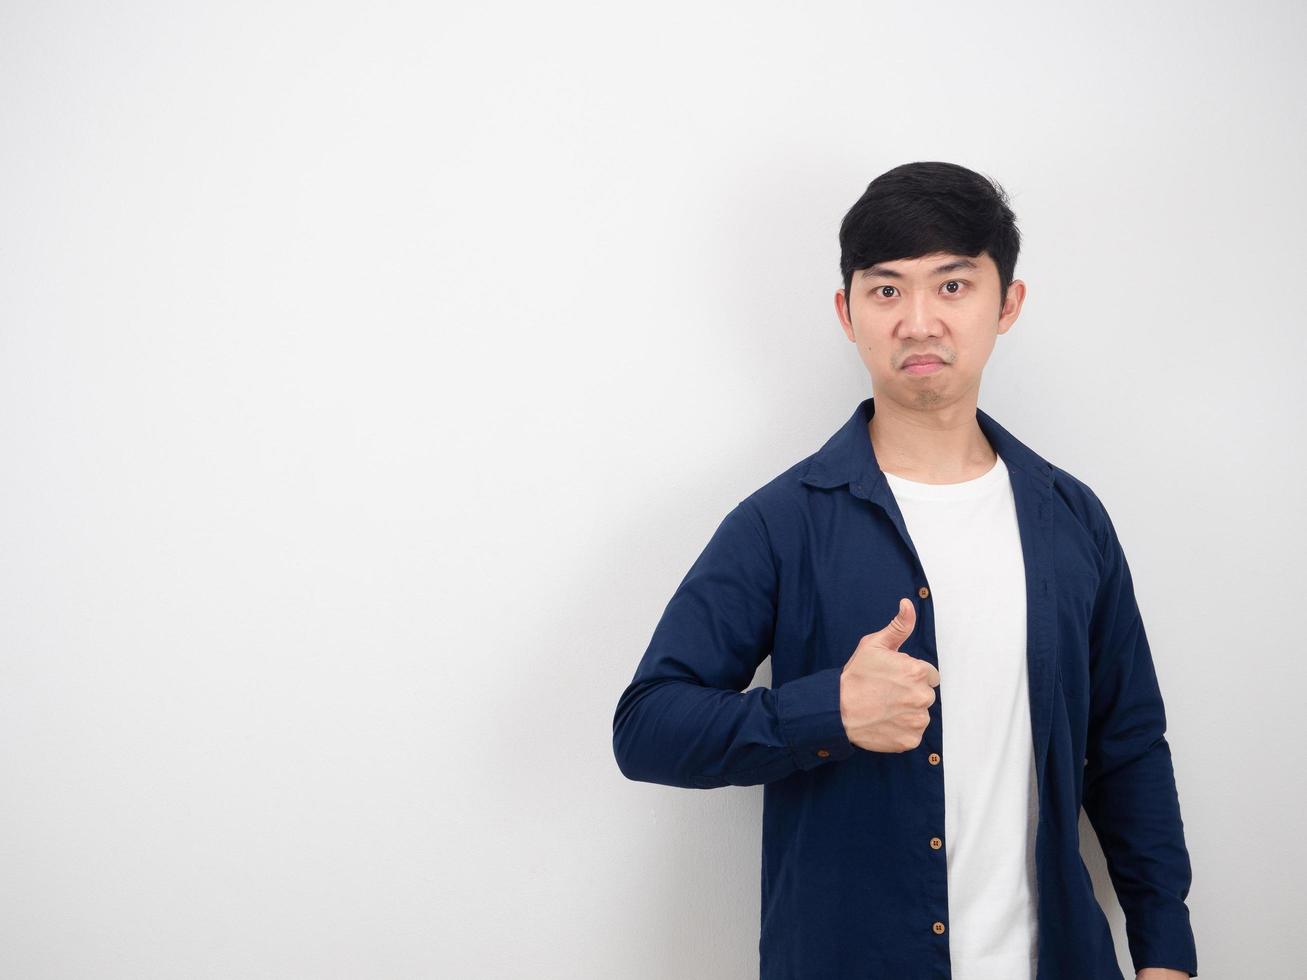 Asian man confident face show thumb up on white background photo